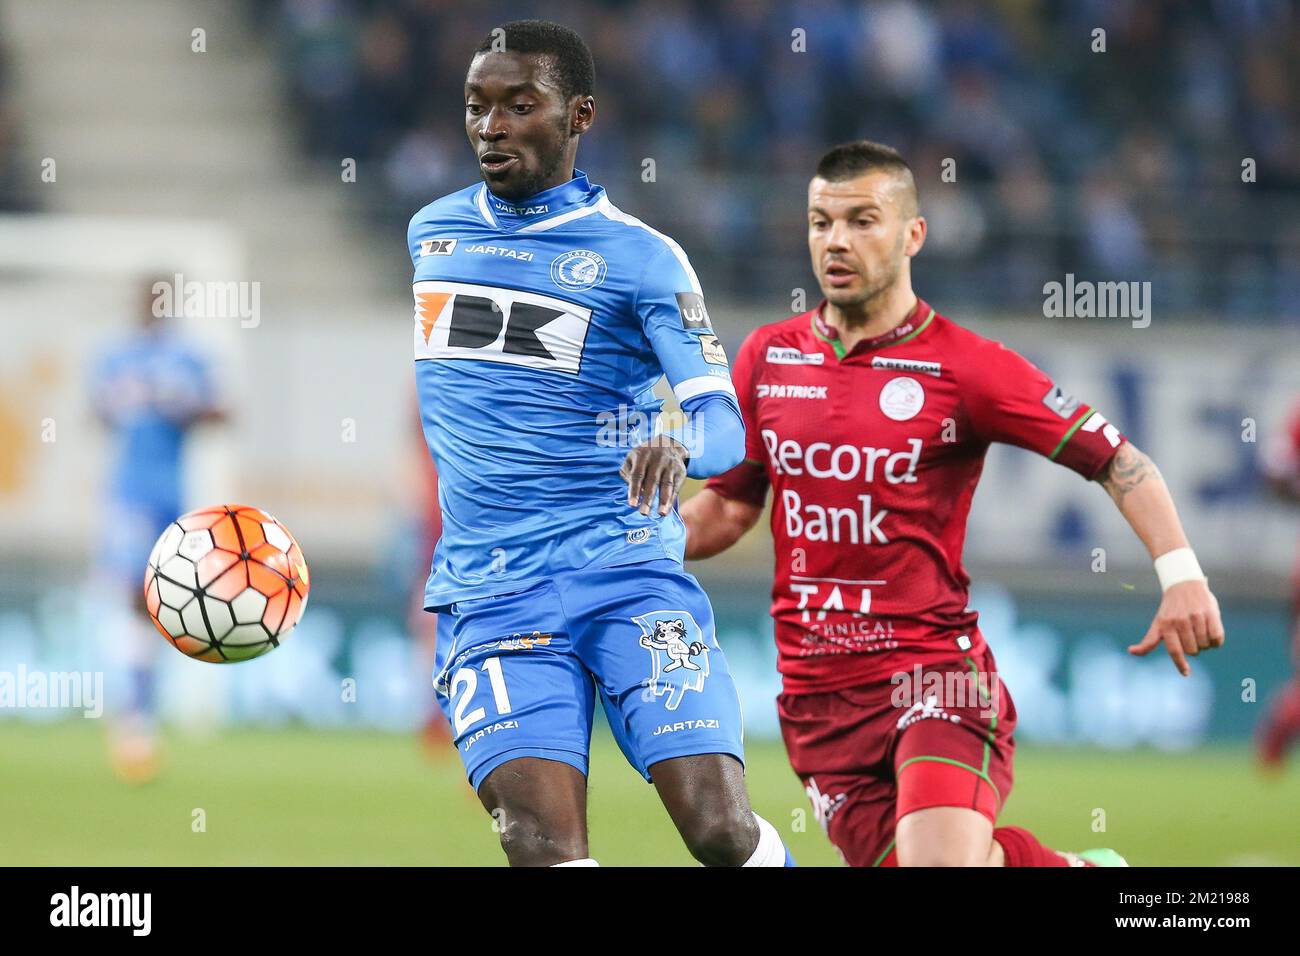 Gent's Nana Asare and Essevee's Alessandro Cordaro fight for the ball during the Jupiler Pro League match between KAA Gent and Zulte Waregem, in Gent, Friday 01 April 2016, on day 1 of the Play-off 1 of the Belgian soccer championship.  Stock Photo